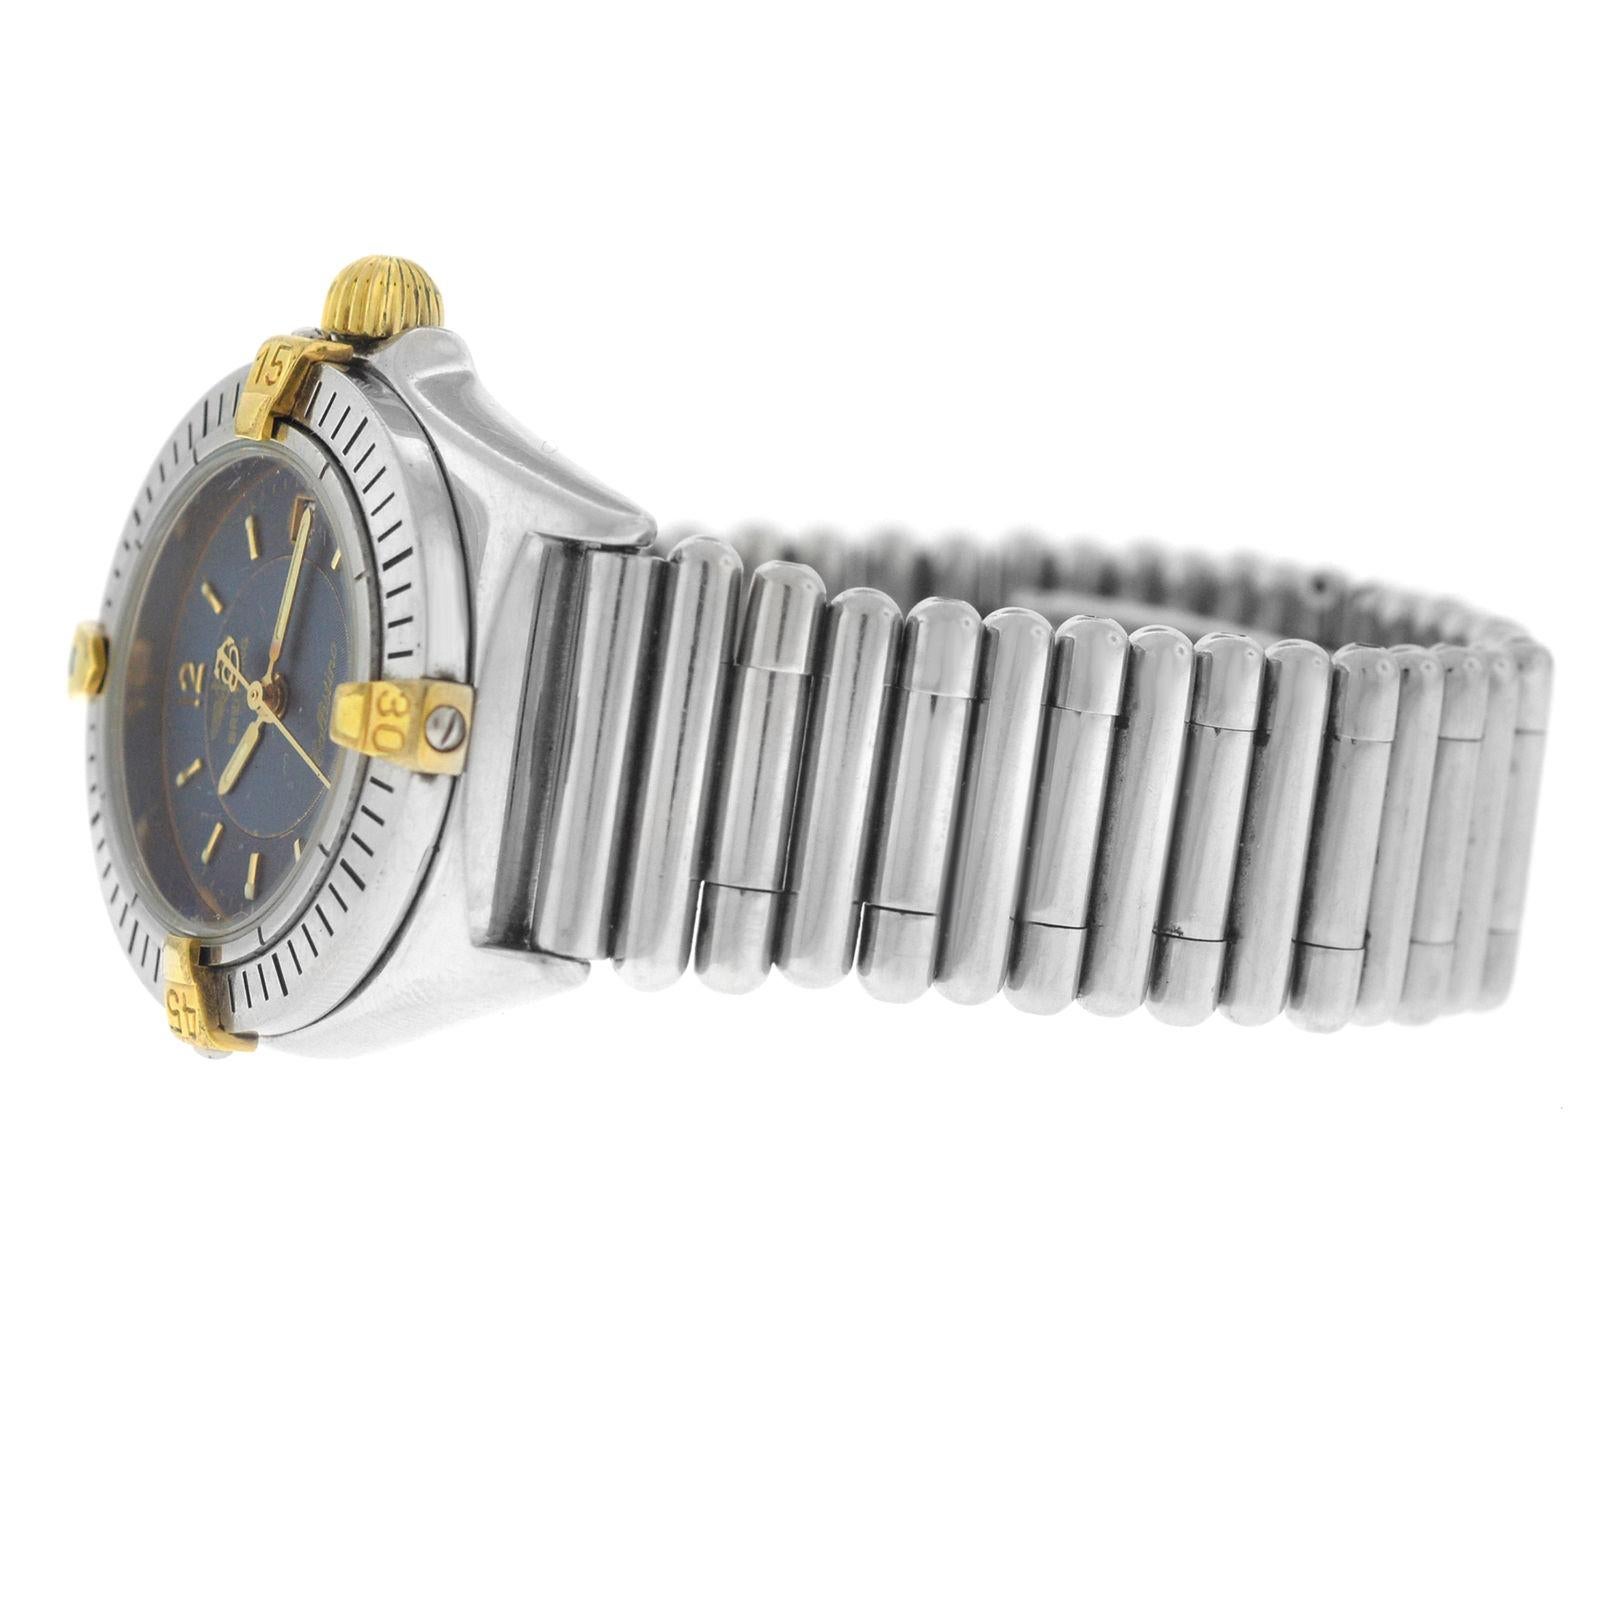 Authentic Ladies Breitling Callisto Steel Quartz Date Watch In Excellent Condition For Sale In New York, NY